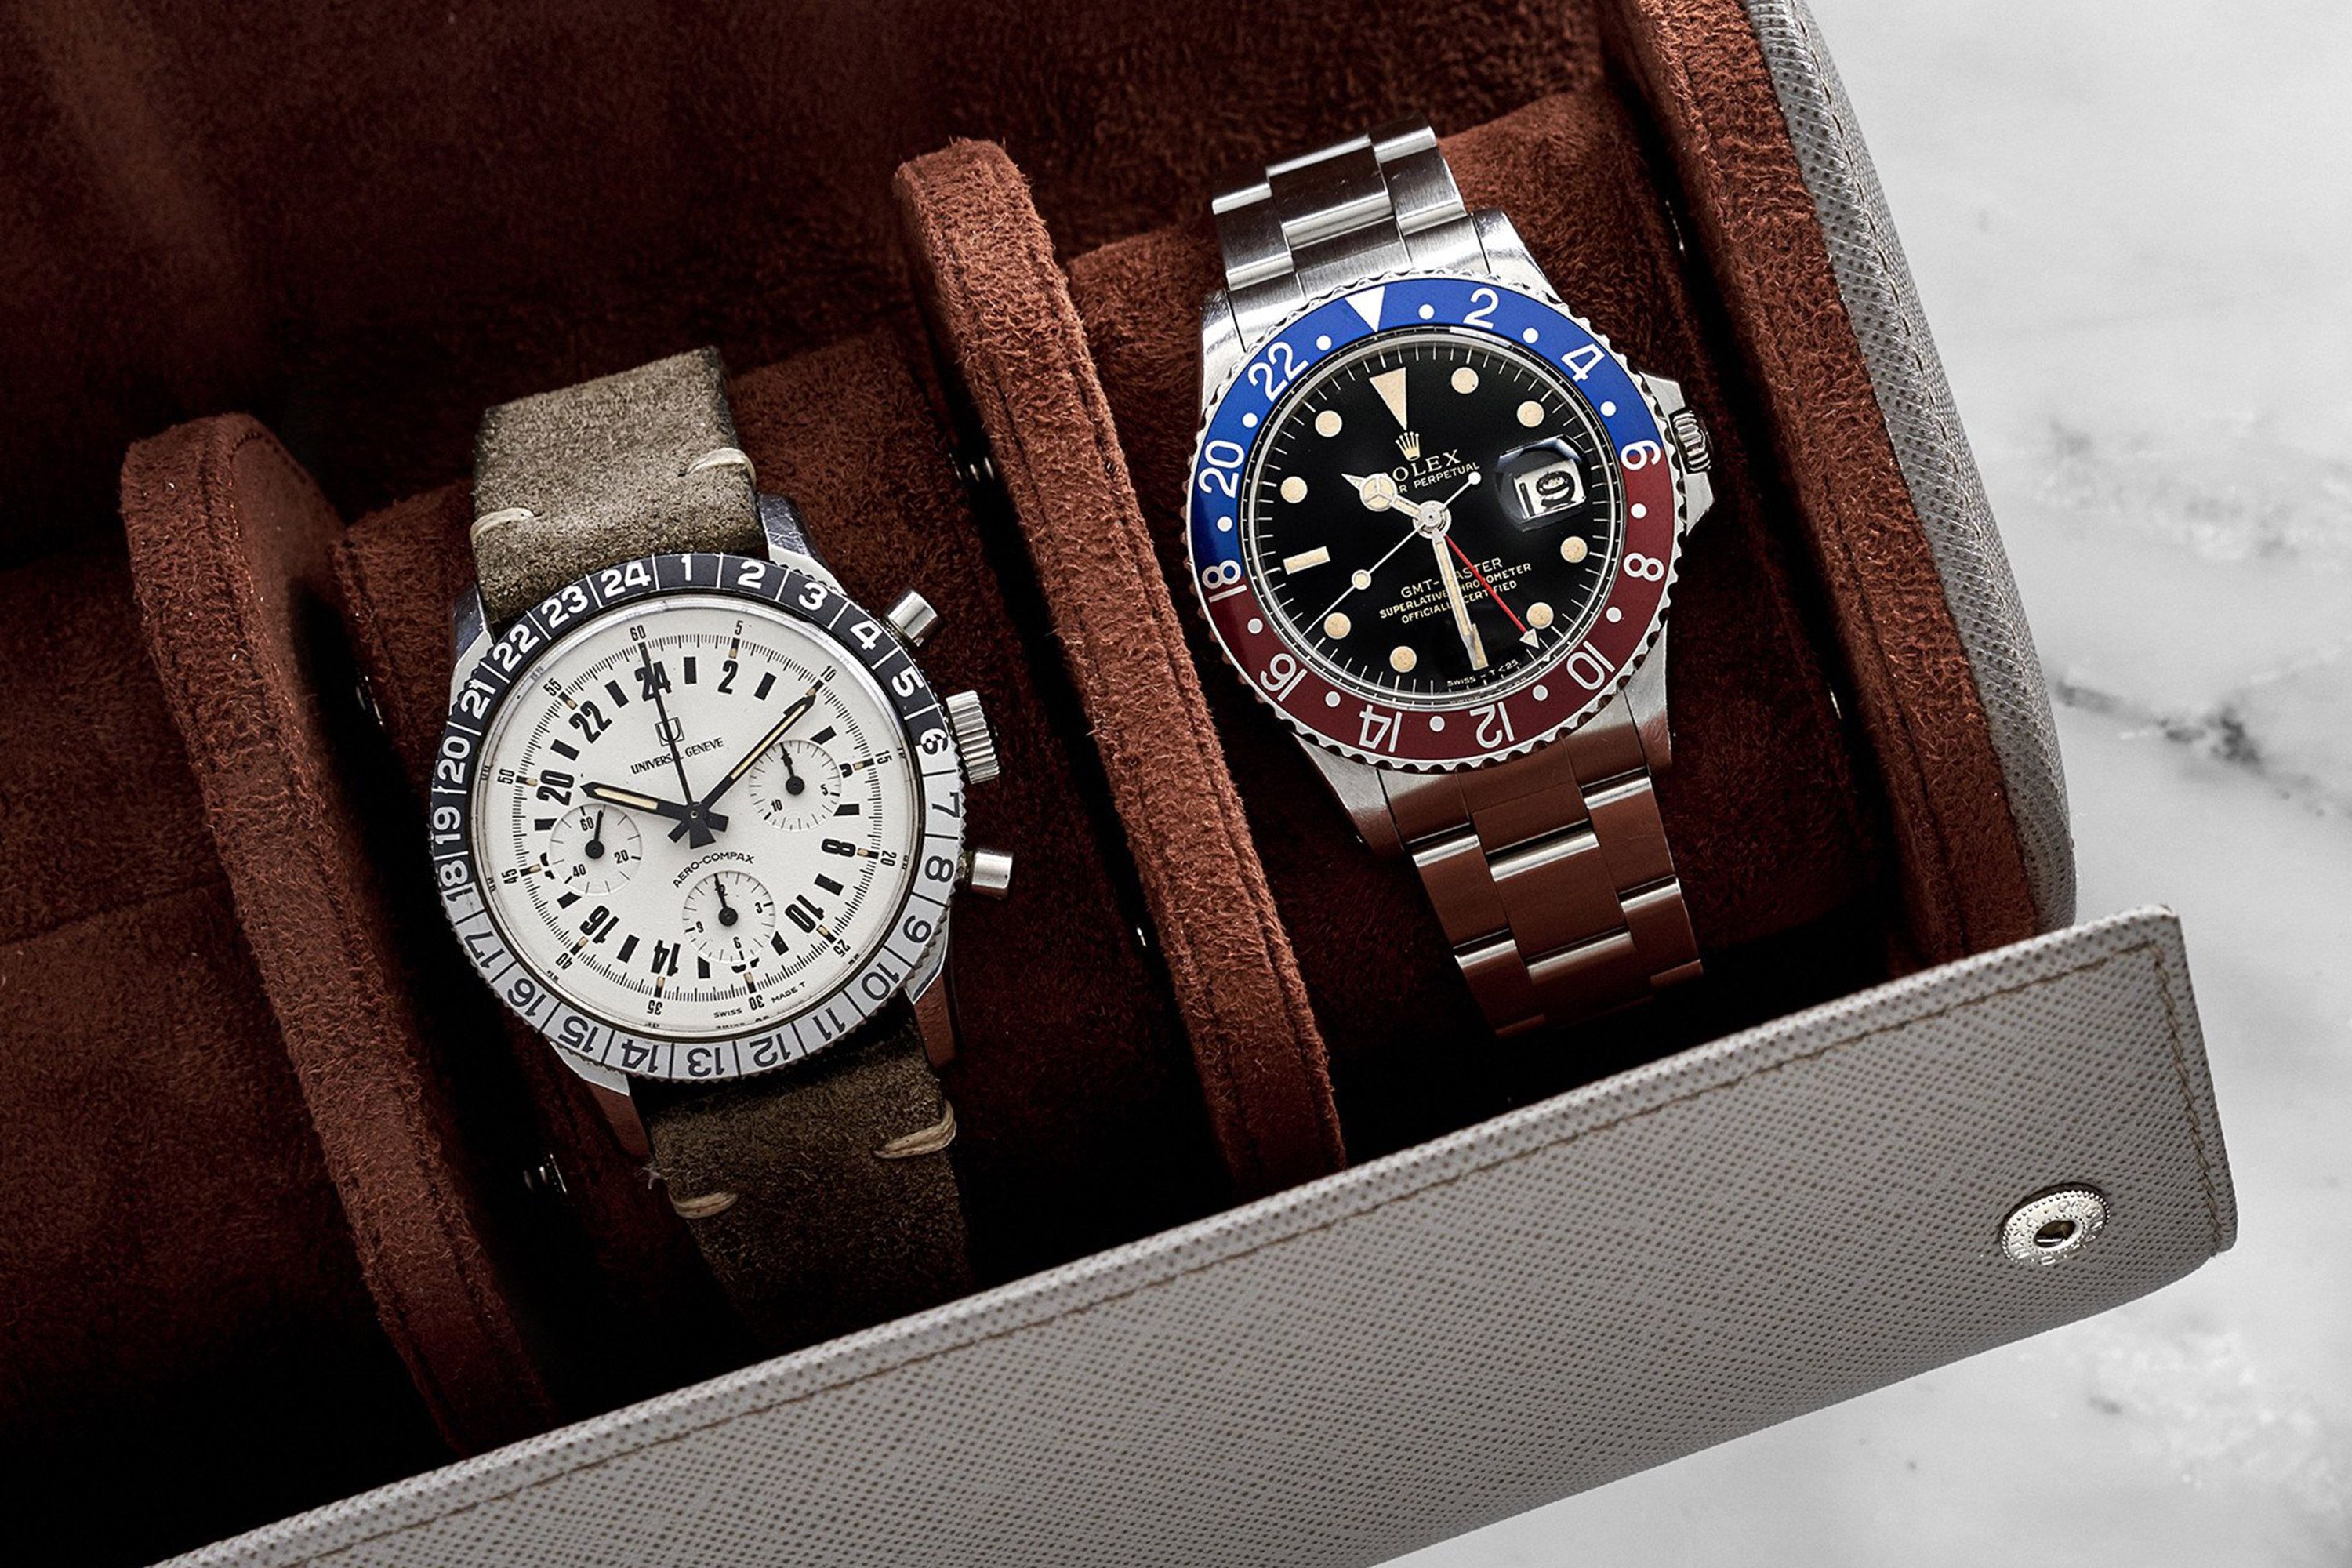 The Best Cases, Rolls and Pouches for Traveling With Your Watches